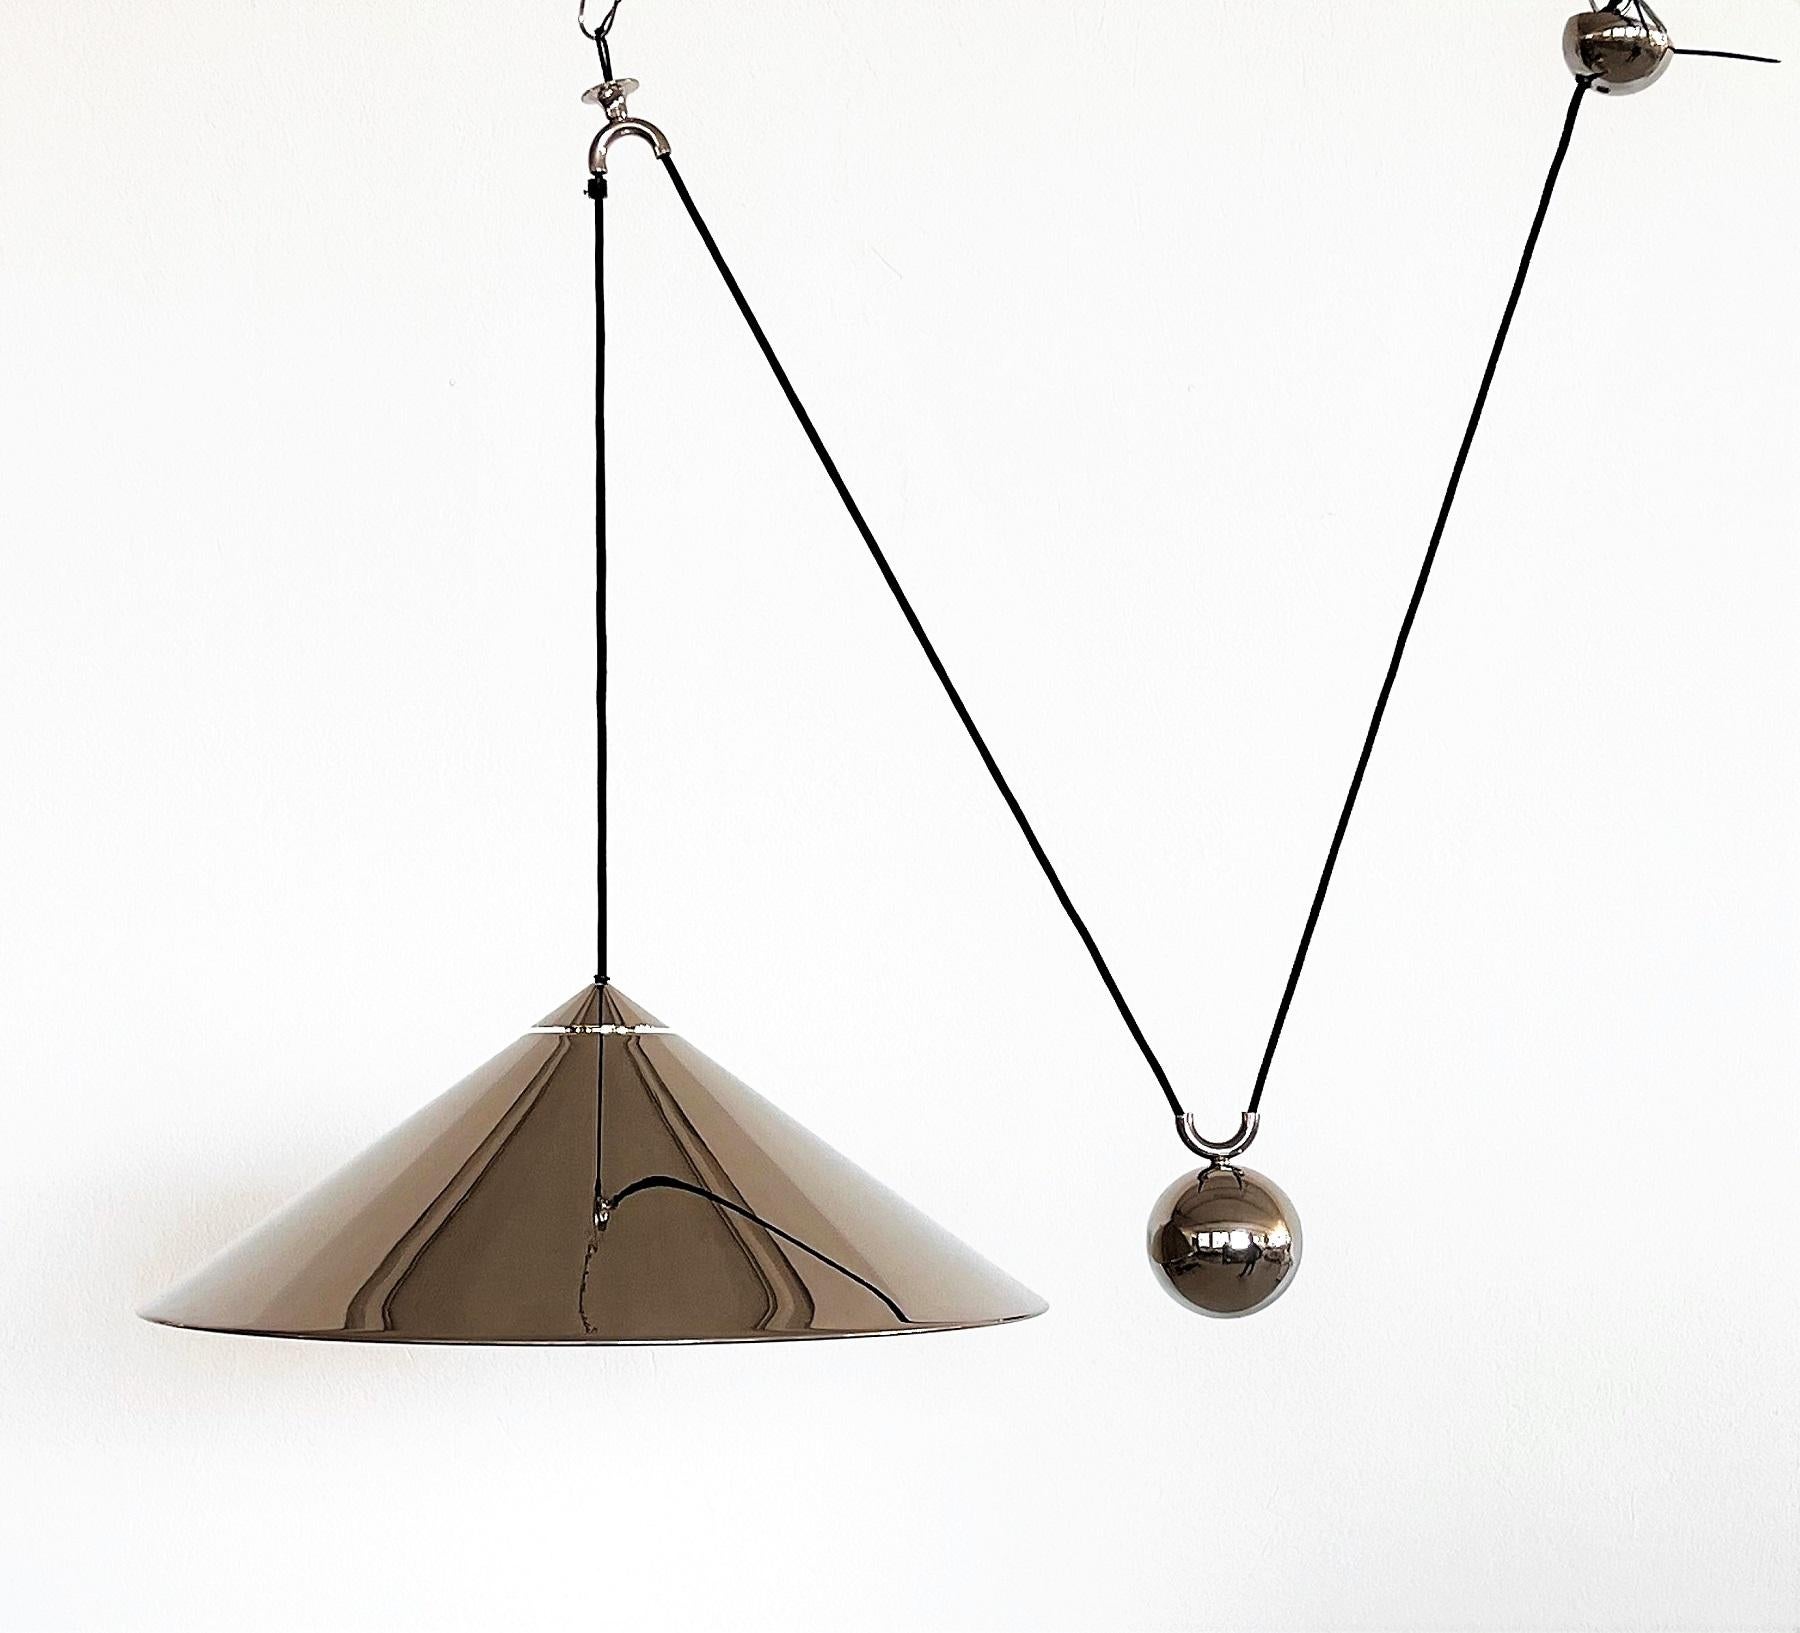 Elegant, early version of large counter balance pendant light, named KEOS, by Florian Schulz, made in Germany in the 1970s. Out of production for decades.
The pendant lamp is adjustable in height from 31,5in to 60in ( 80cm to 150cm) by changing the